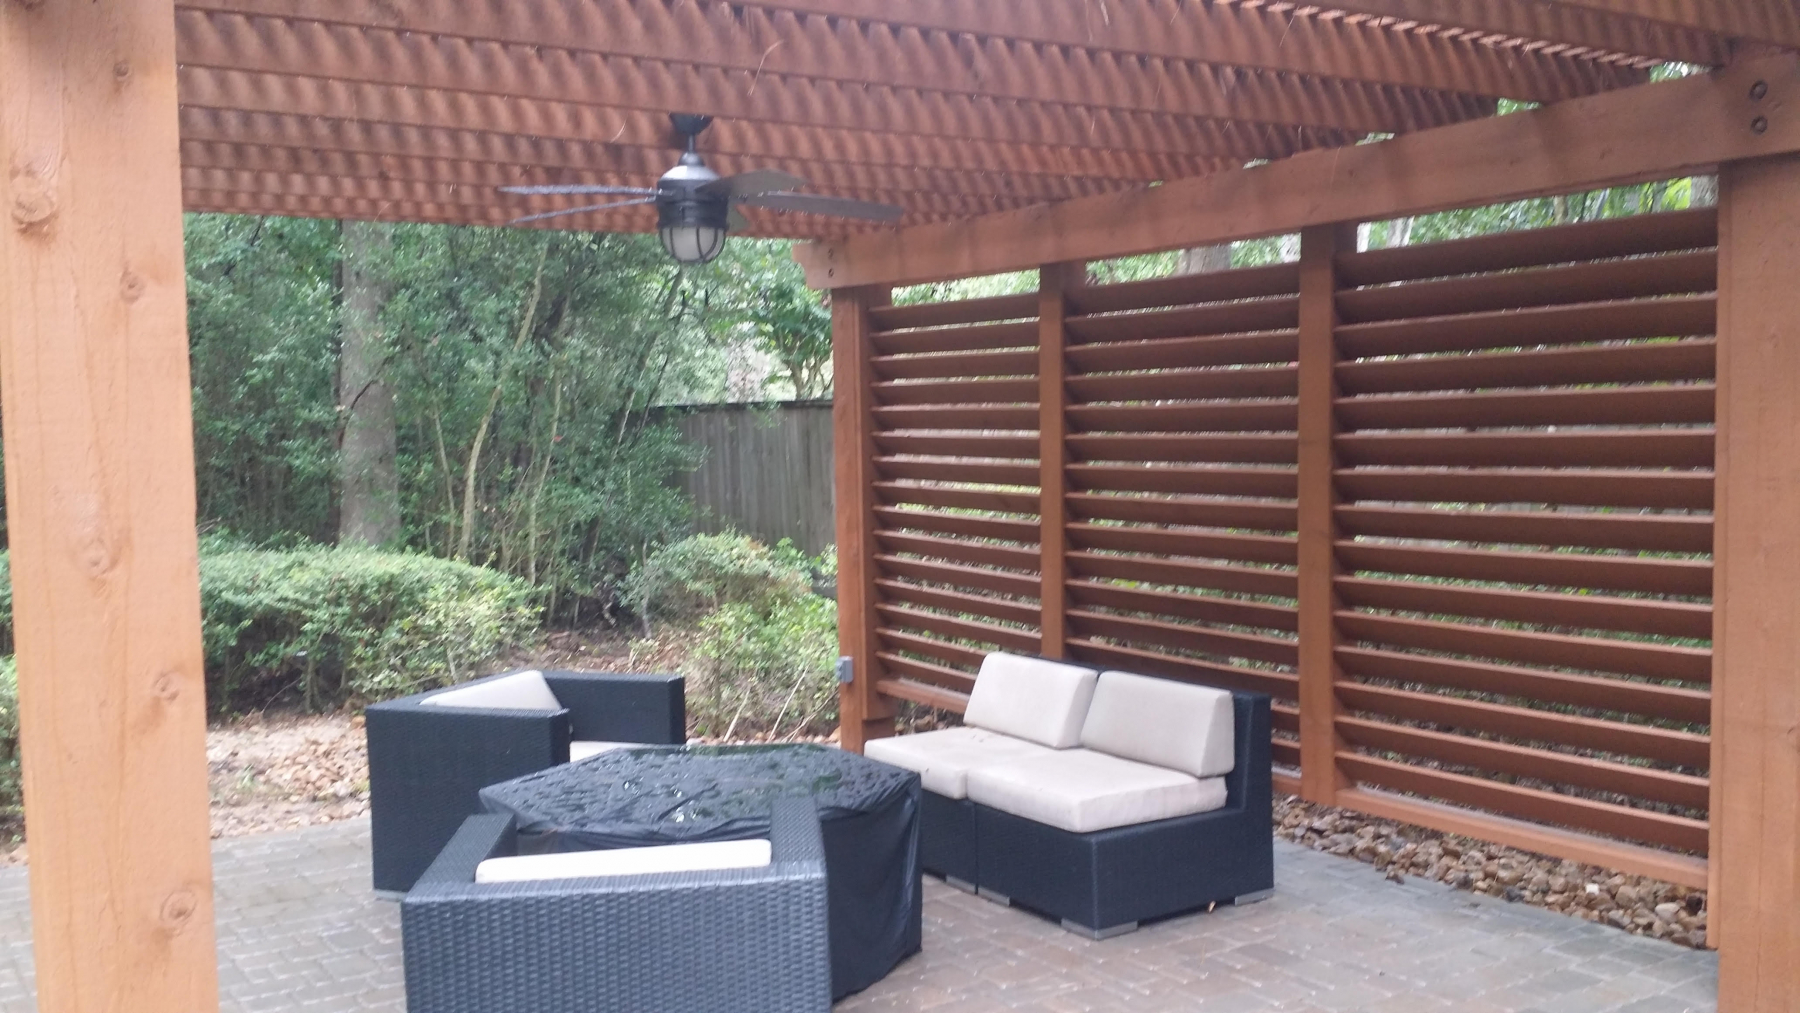 Outdoor-Living-spaces-in-The-Woodlands-Custom-pergolas-and-seating-areas.